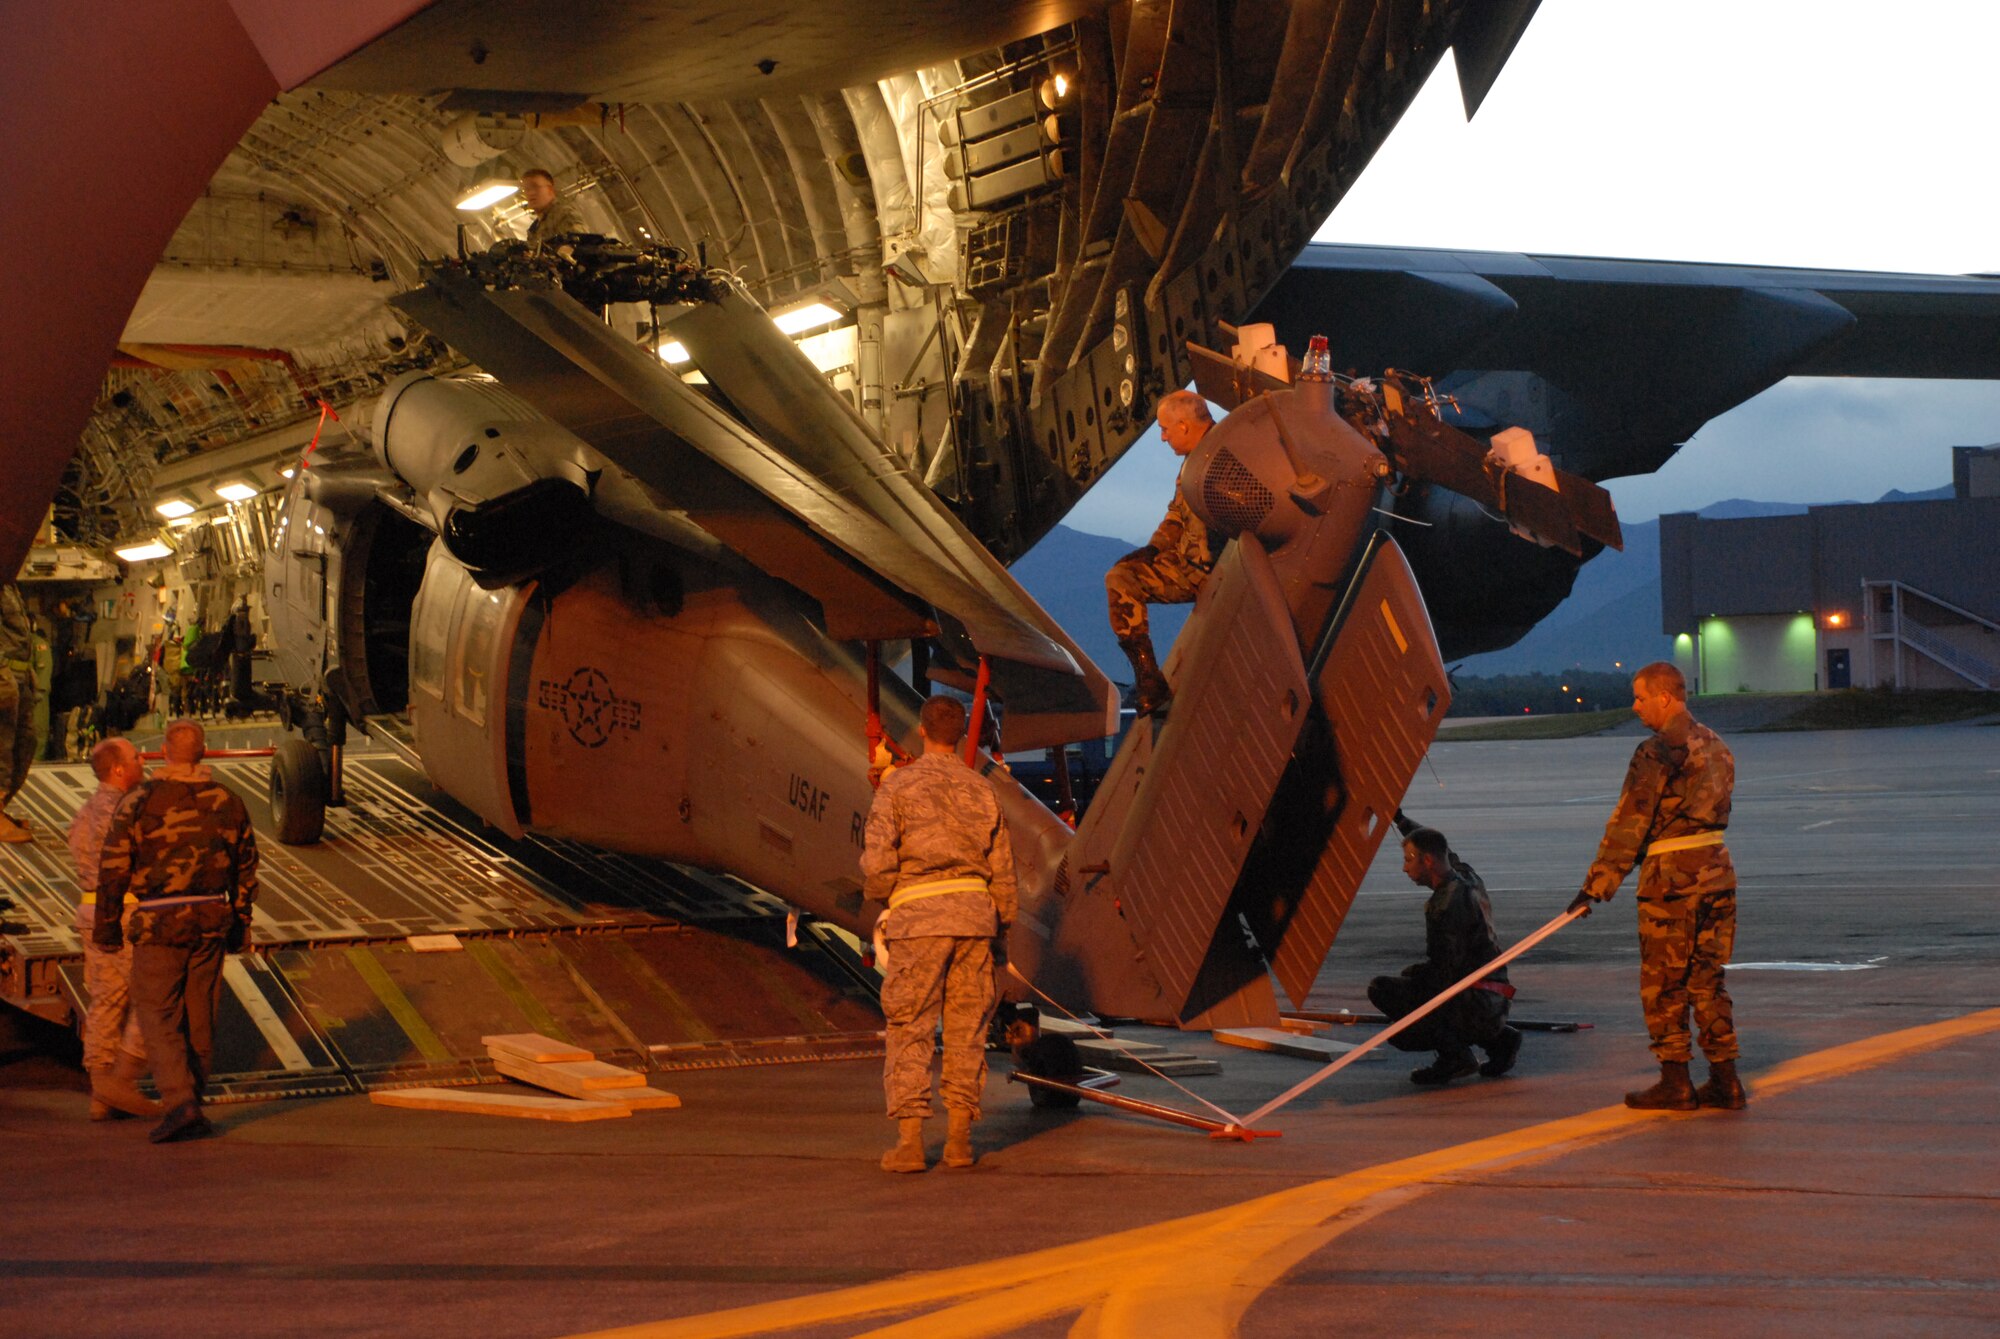 KULIS AIR NATIONAL GUARD BASE, Alaska -- In the early morning hours of Sept. 1, 2008, Alaska Air National Guardsmen from the 176th Logistics Readiness Squadron maneuver an HH-60 Pave Hawk helicopter onto the loading ramp of a C-17 strategic airlift jet. The helicopter is one of two the Alaska Air National Guard?s 176th Wing is deploying to the Gulf Coast region to support possible search-and-rescue operations expected in the wake of Hurricane Gustav. Approximately 30 wing members have deployed to the region as well. Alaska Air National Guard photo by 2nd Lt. John Callahan.